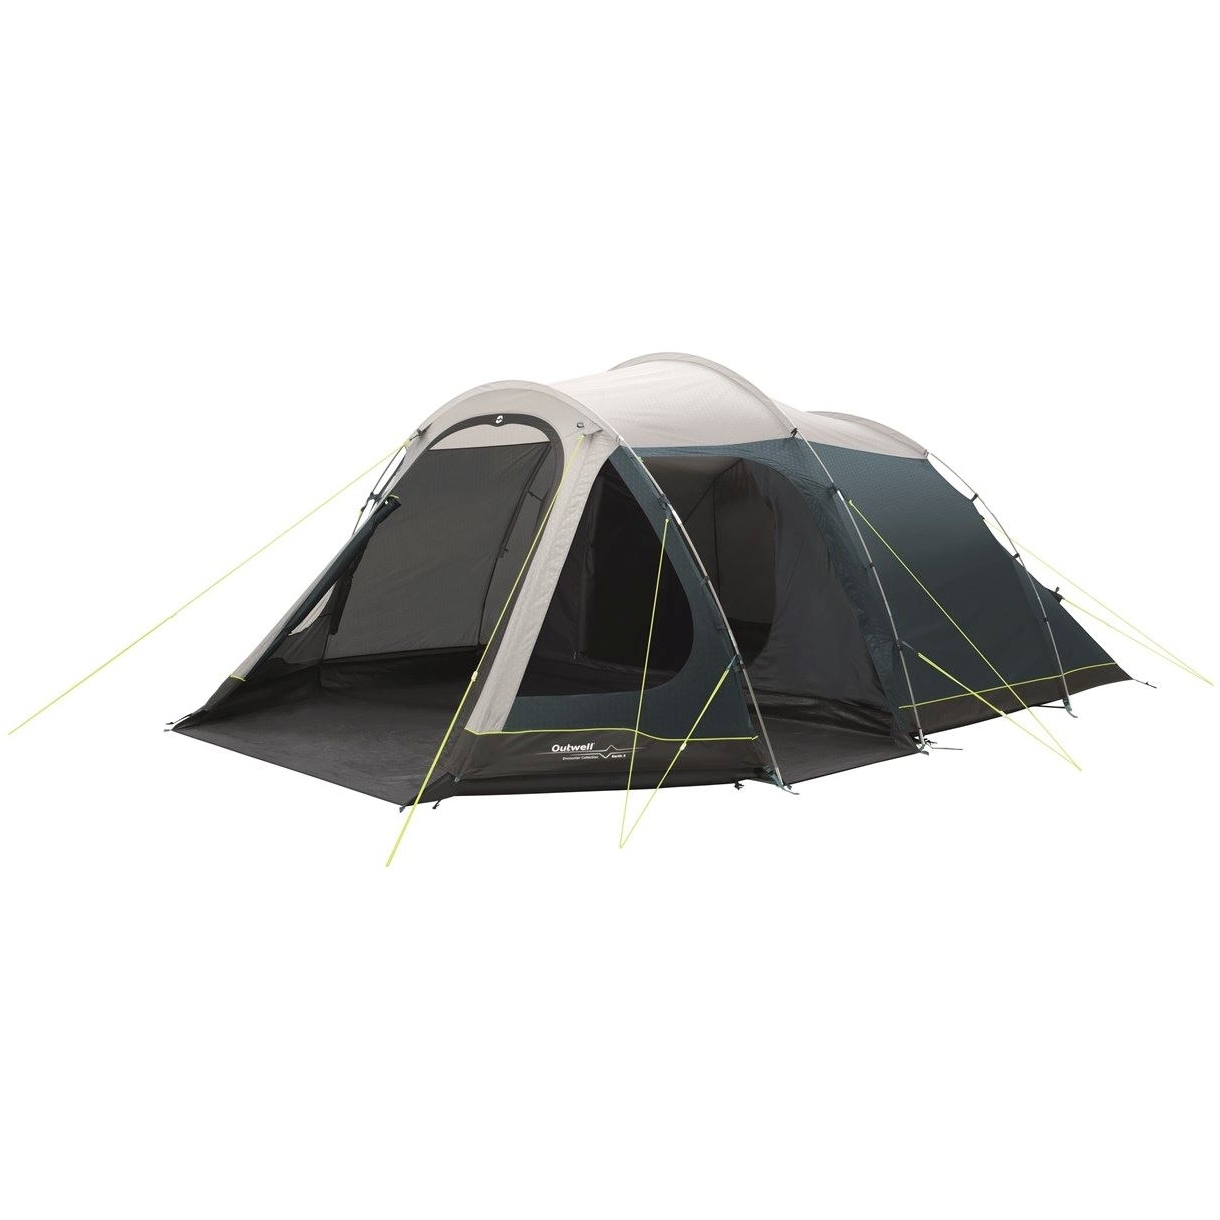 Productfoto van Outwell Earth 5 Tent - Blue